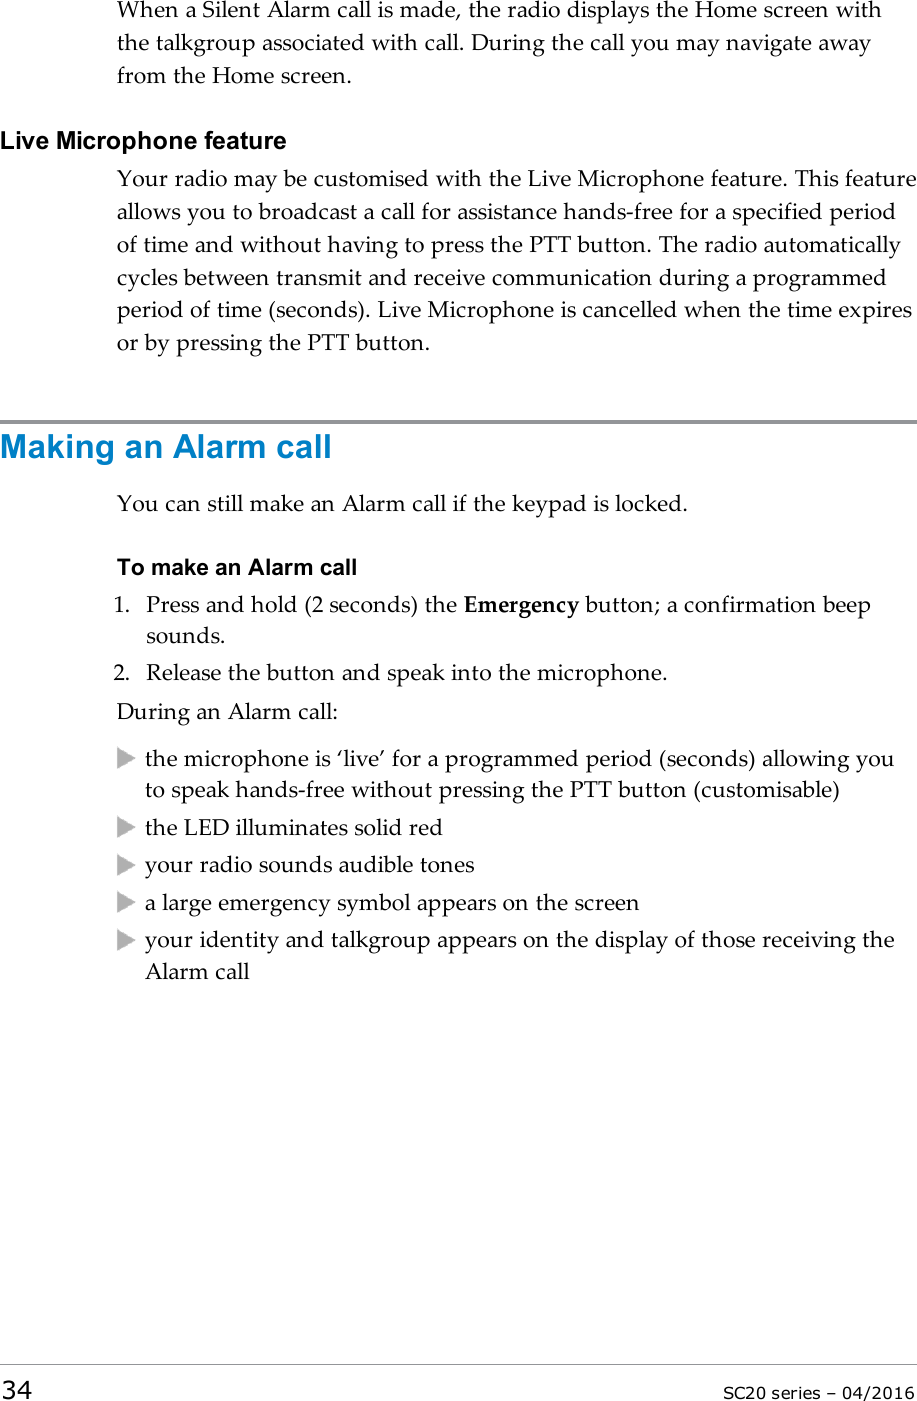 When a Silent Alarm call is made, the radio displays the Home screen withthe talkgroup associated with call. During the call you may navigate awayfrom the Home screen.Live Microphone featureYour radio may be customised with the Live Microphone feature. This featureallows you to broadcast a call for assistance hands-free for a specified periodof time and without having to press the PTT button. The radio automaticallycycles between transmit and receive communication during a programmedperiod of time (seconds). Live Microphone is cancelled when the time expiresor by pressing the PTT button.Making an Alarm callYou can still make an Alarm call if the keypad is locked.To make an Alarm call1. Press and hold (2 seconds) the Emergency button; a confirmation beepsounds.2. Release the button and speak into the microphone.During an Alarm call:the microphone is ‘live’ for a programmed period (seconds) allowing youto speak hands-free without pressing the PTT button (customisable)the LED illuminates solid redyour radio sounds audible tonesa large emergency symbol appears on the screenyour identity and talkgroup appears on the display of those receiving theAlarm call34 SC20 series – 04/2016